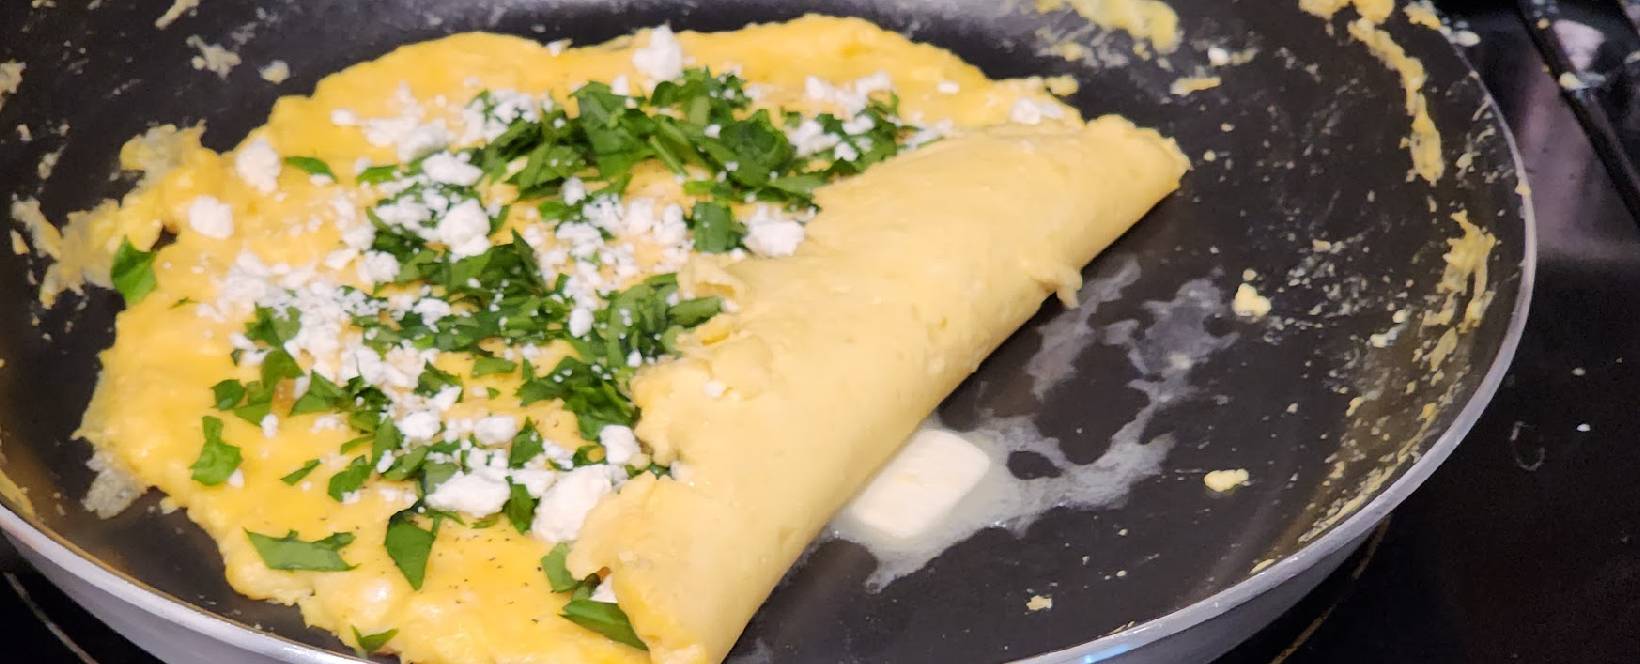 French Omelet with Spinach and Feta - The Mamasaur